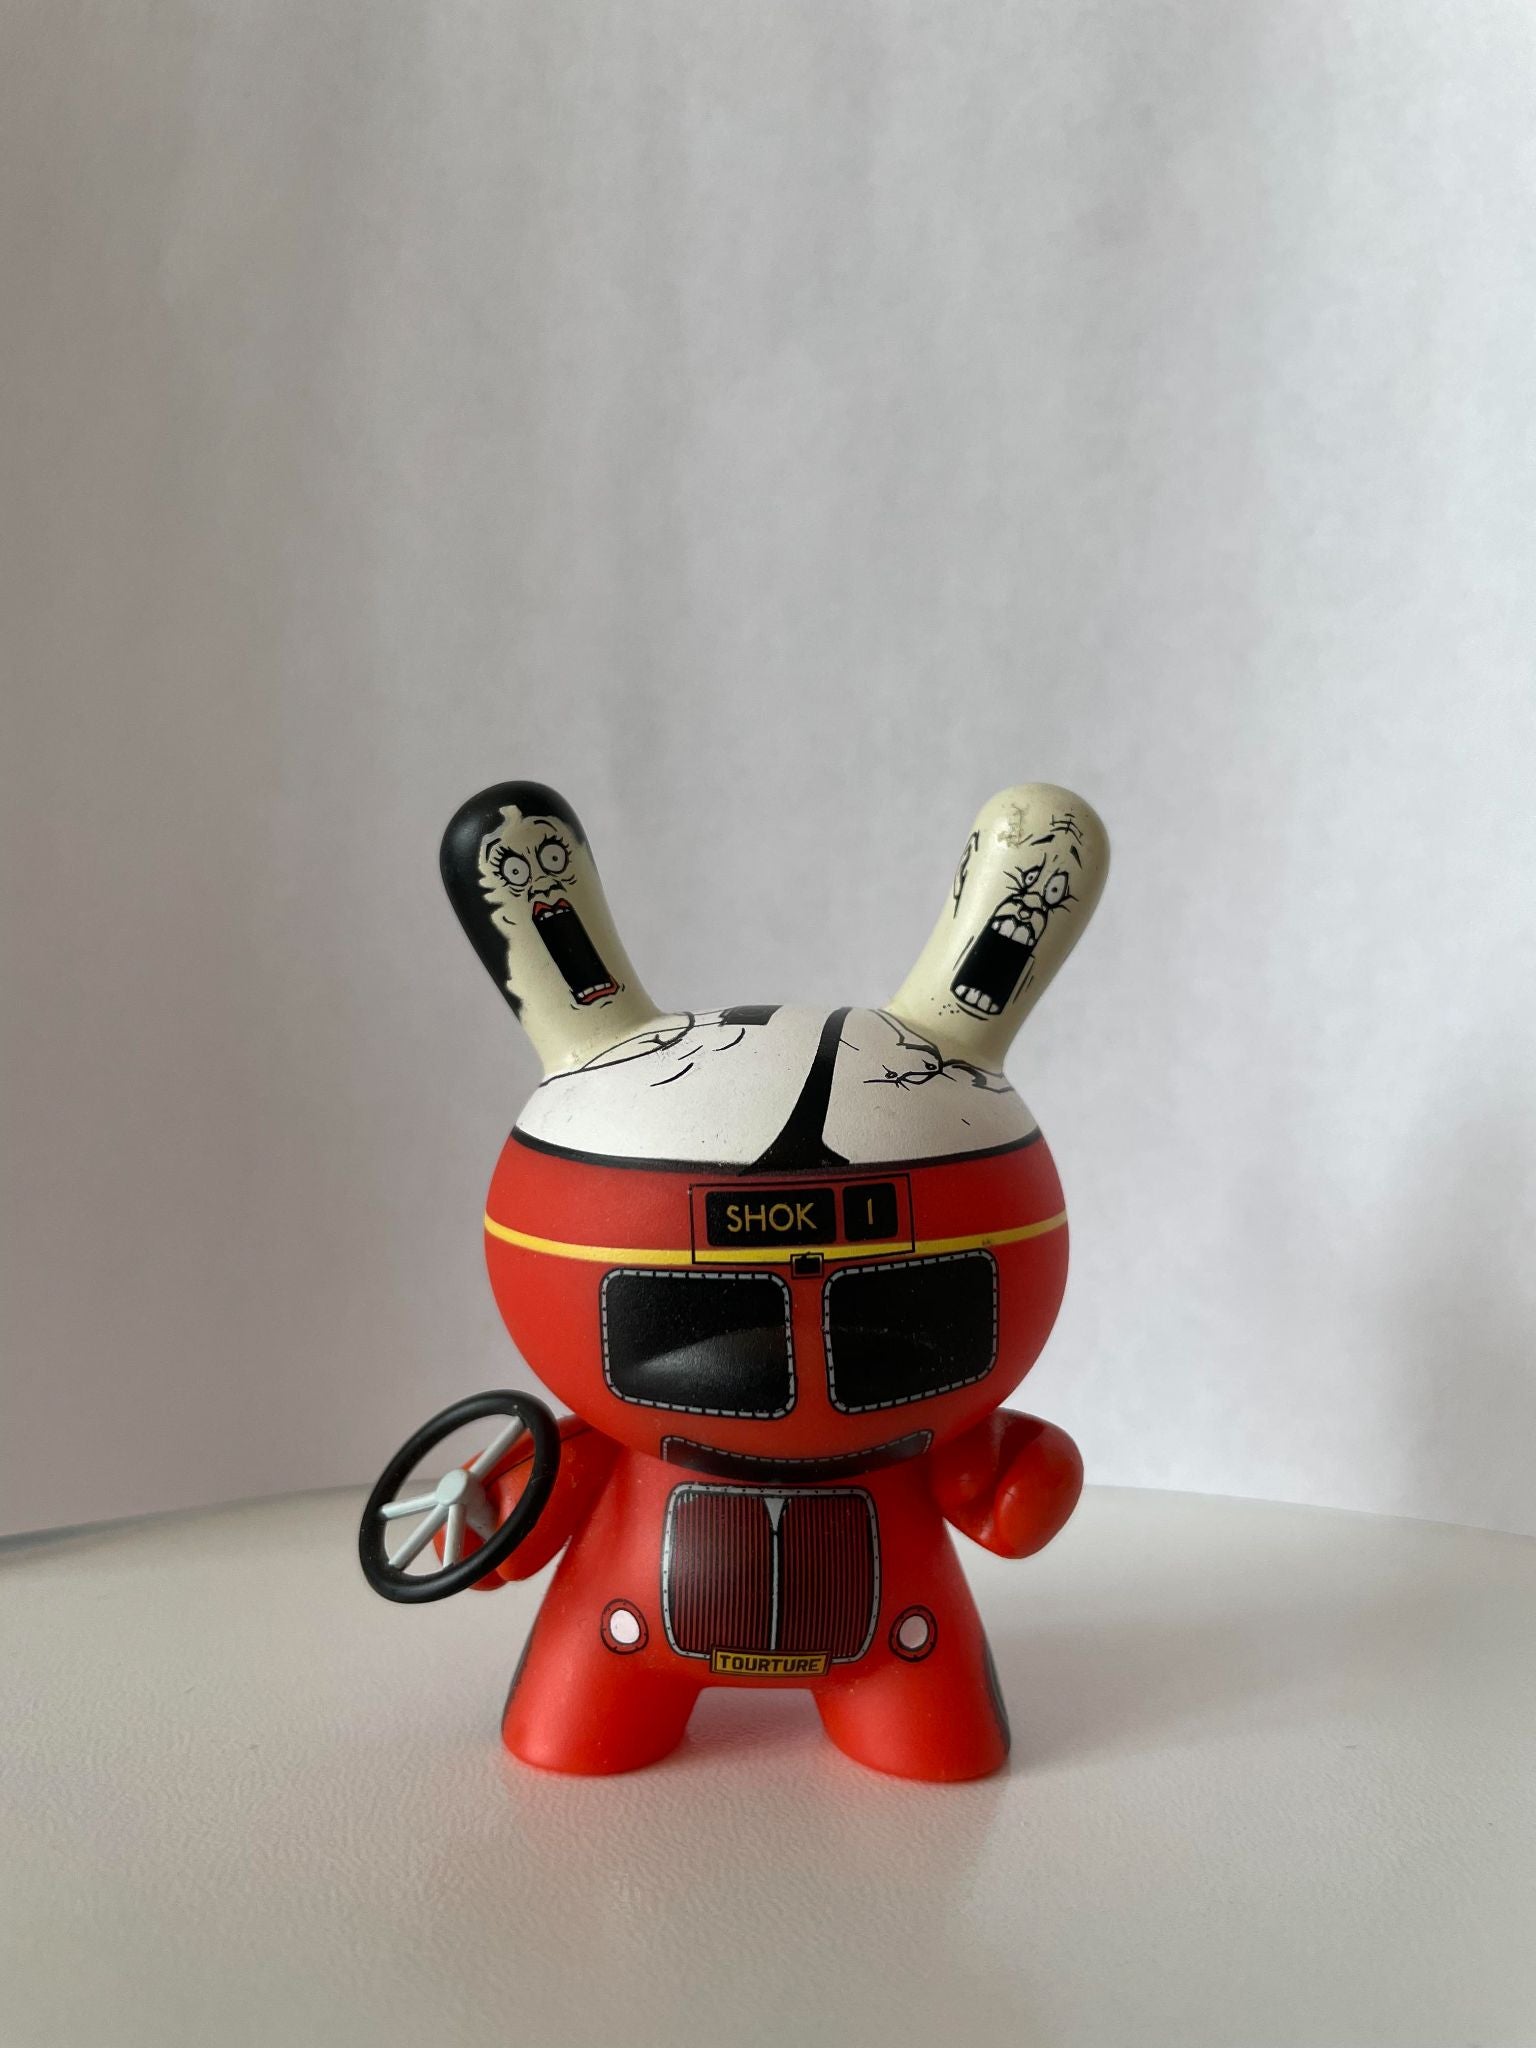 Torture Bus - Dunny Ye Olde English Series by Kidrobot  - 1